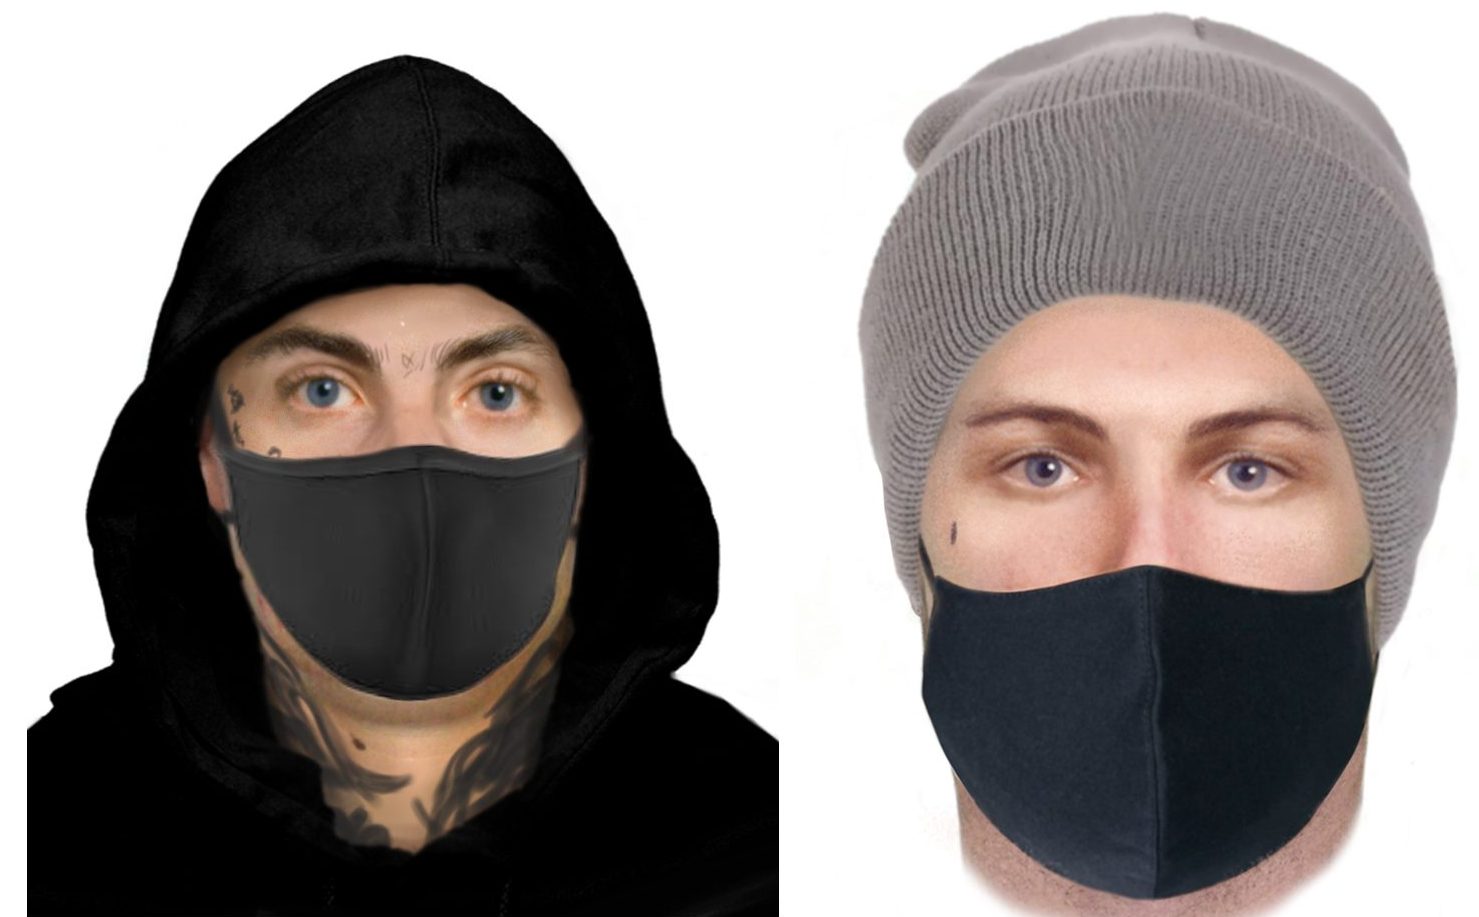 Police hope face-fit images will help identify alleged Bonner shooter